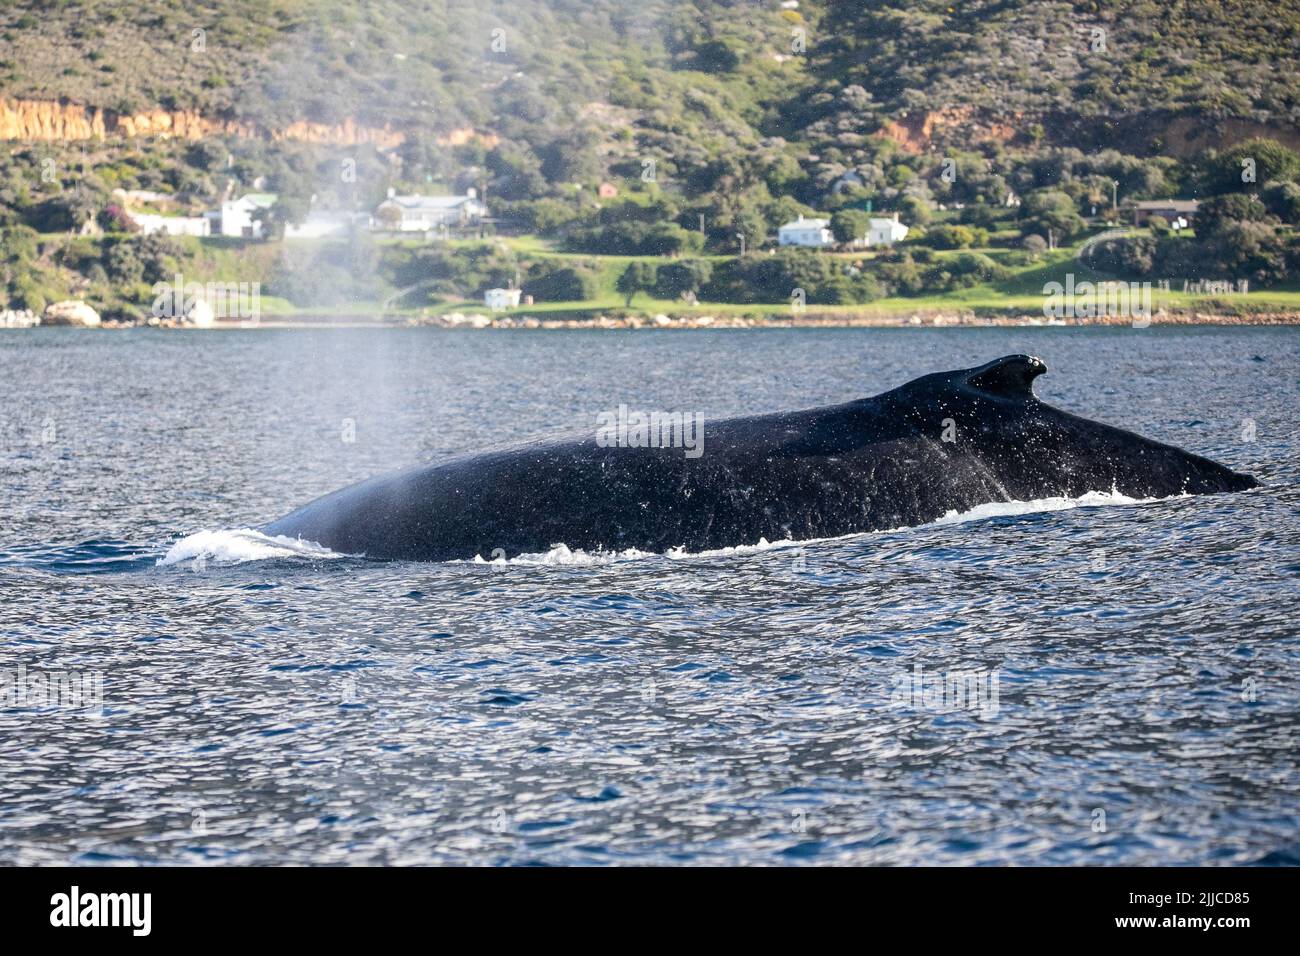 (220725) -- CAPE TOWN, July 25, 2022 (Xinhua) -- A humpback whale is seen in Cape Town, South Africa, on June 15, 2022.  TO GO WITH 'Feature: Passion for whales takes Cape Town residents to citizen science' (Xinhua/Lyu Tianran) Stock Photo